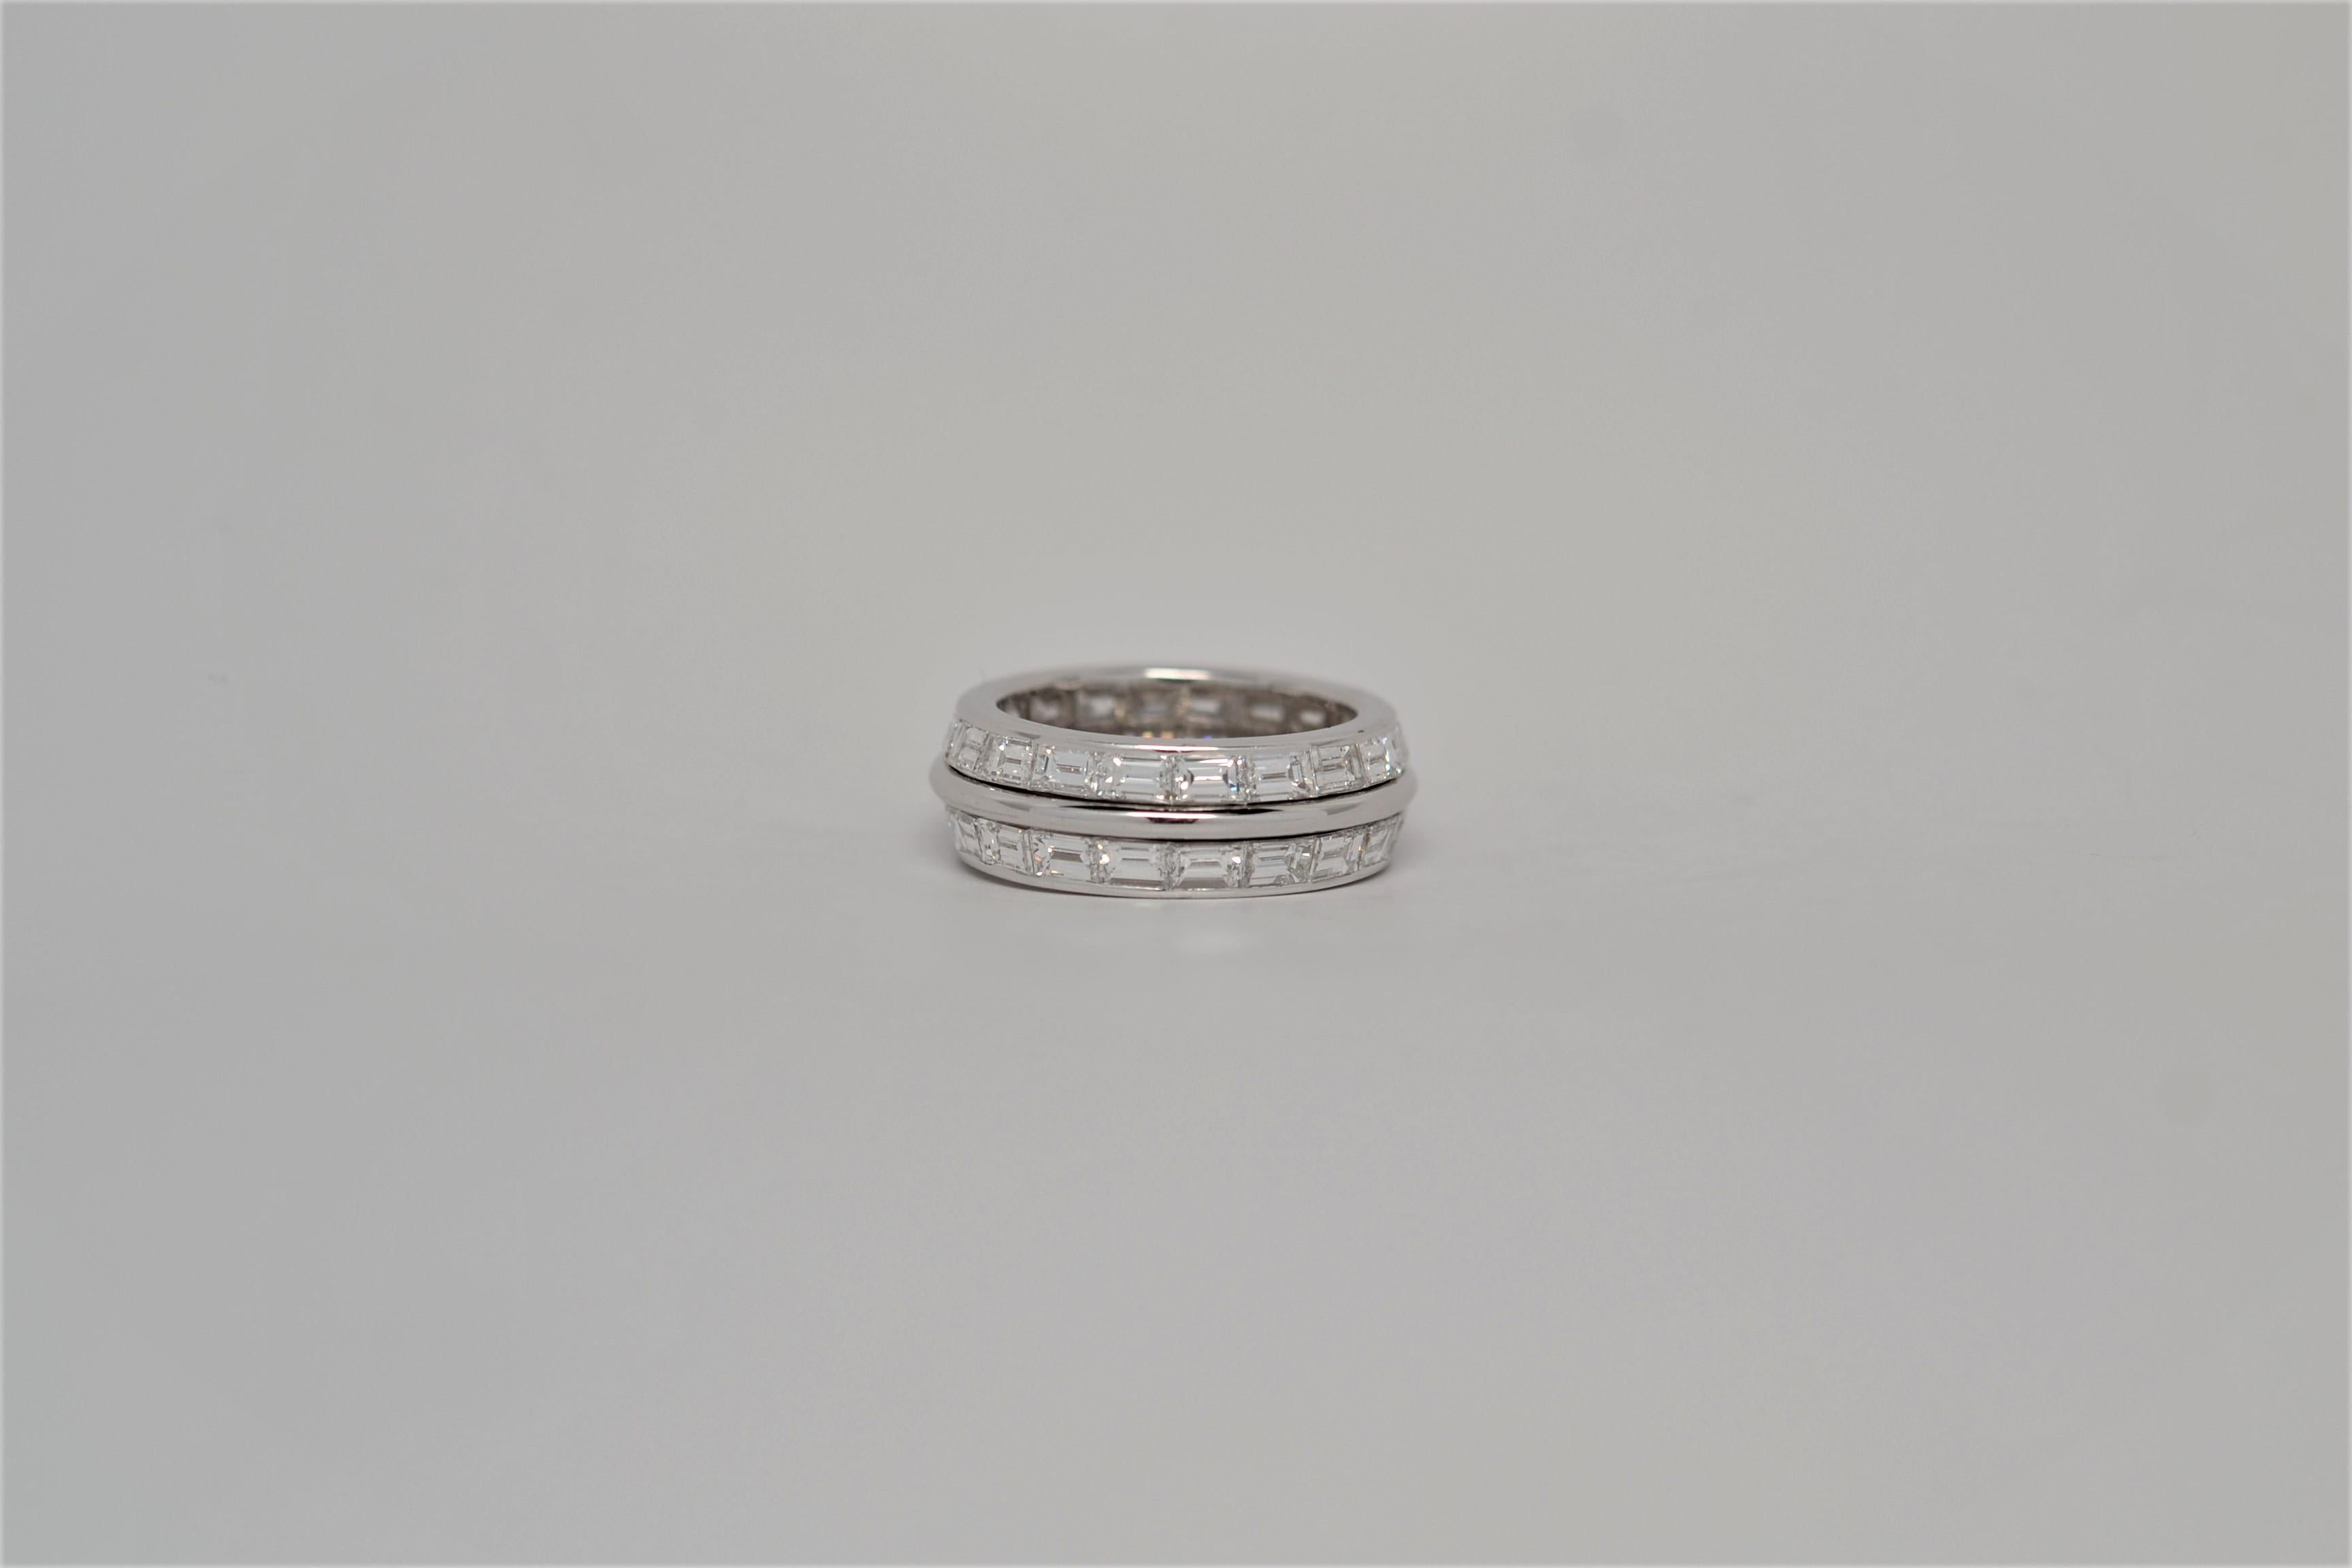 A finely made 18K White Gold Eternity Ring set with Trapezoid Cut Diamonds. The two row eternity ring layout is channel set in an East - West pattern with forty Trapezoid Cut Diamonds that weigh 5.92ct. Diamond color grade range F to G and clarity